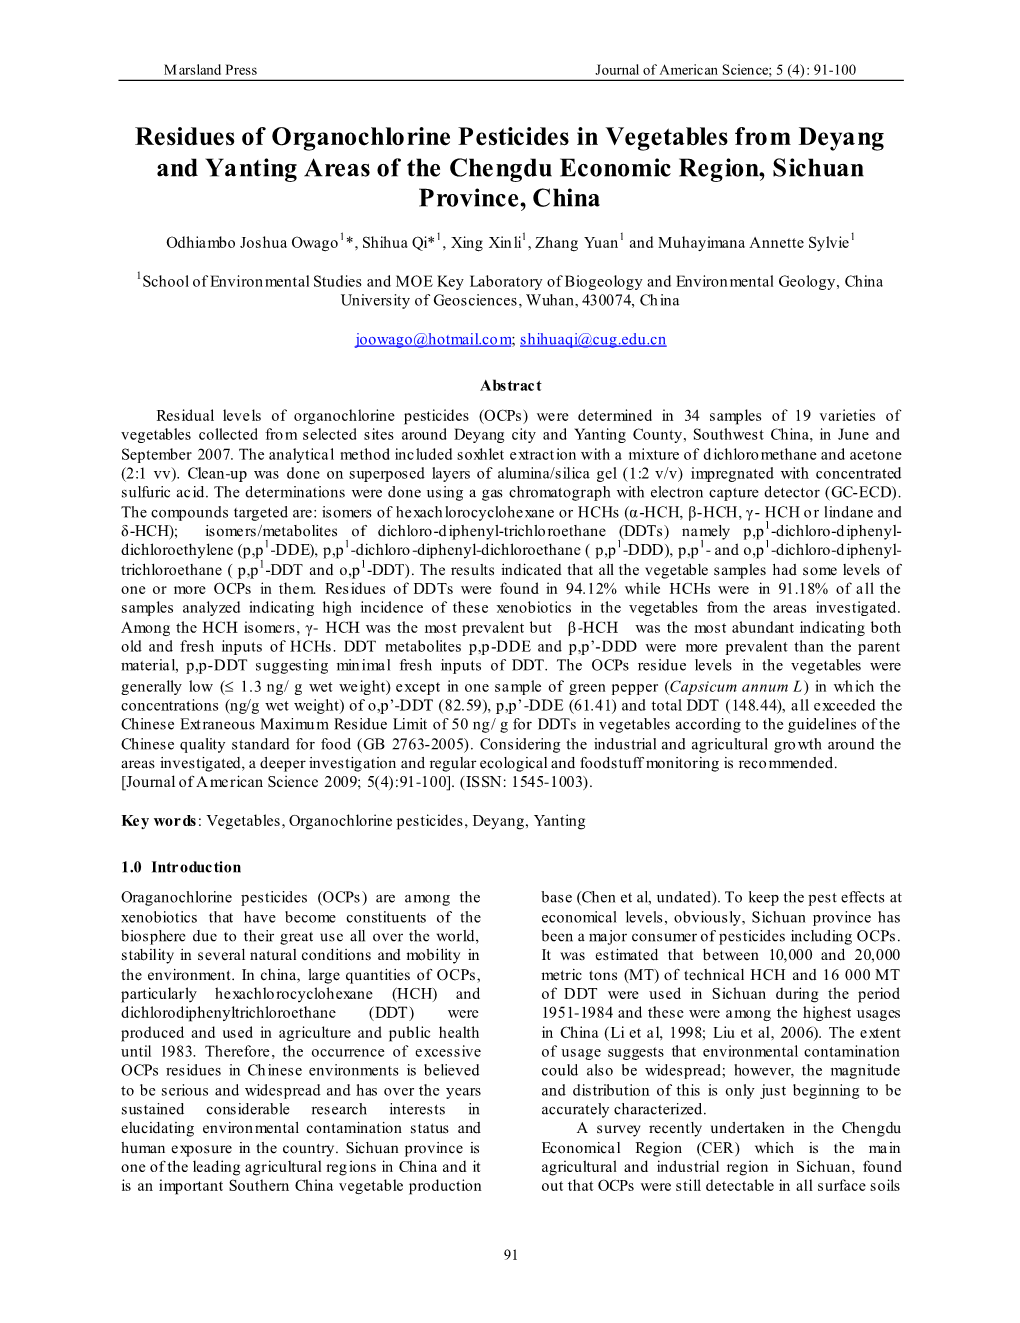 Residues of Organochlorine Pesticides in Vegetables from Deyang and Yanting Areas of the Chengdu Economic Region, Sichuan Province, China